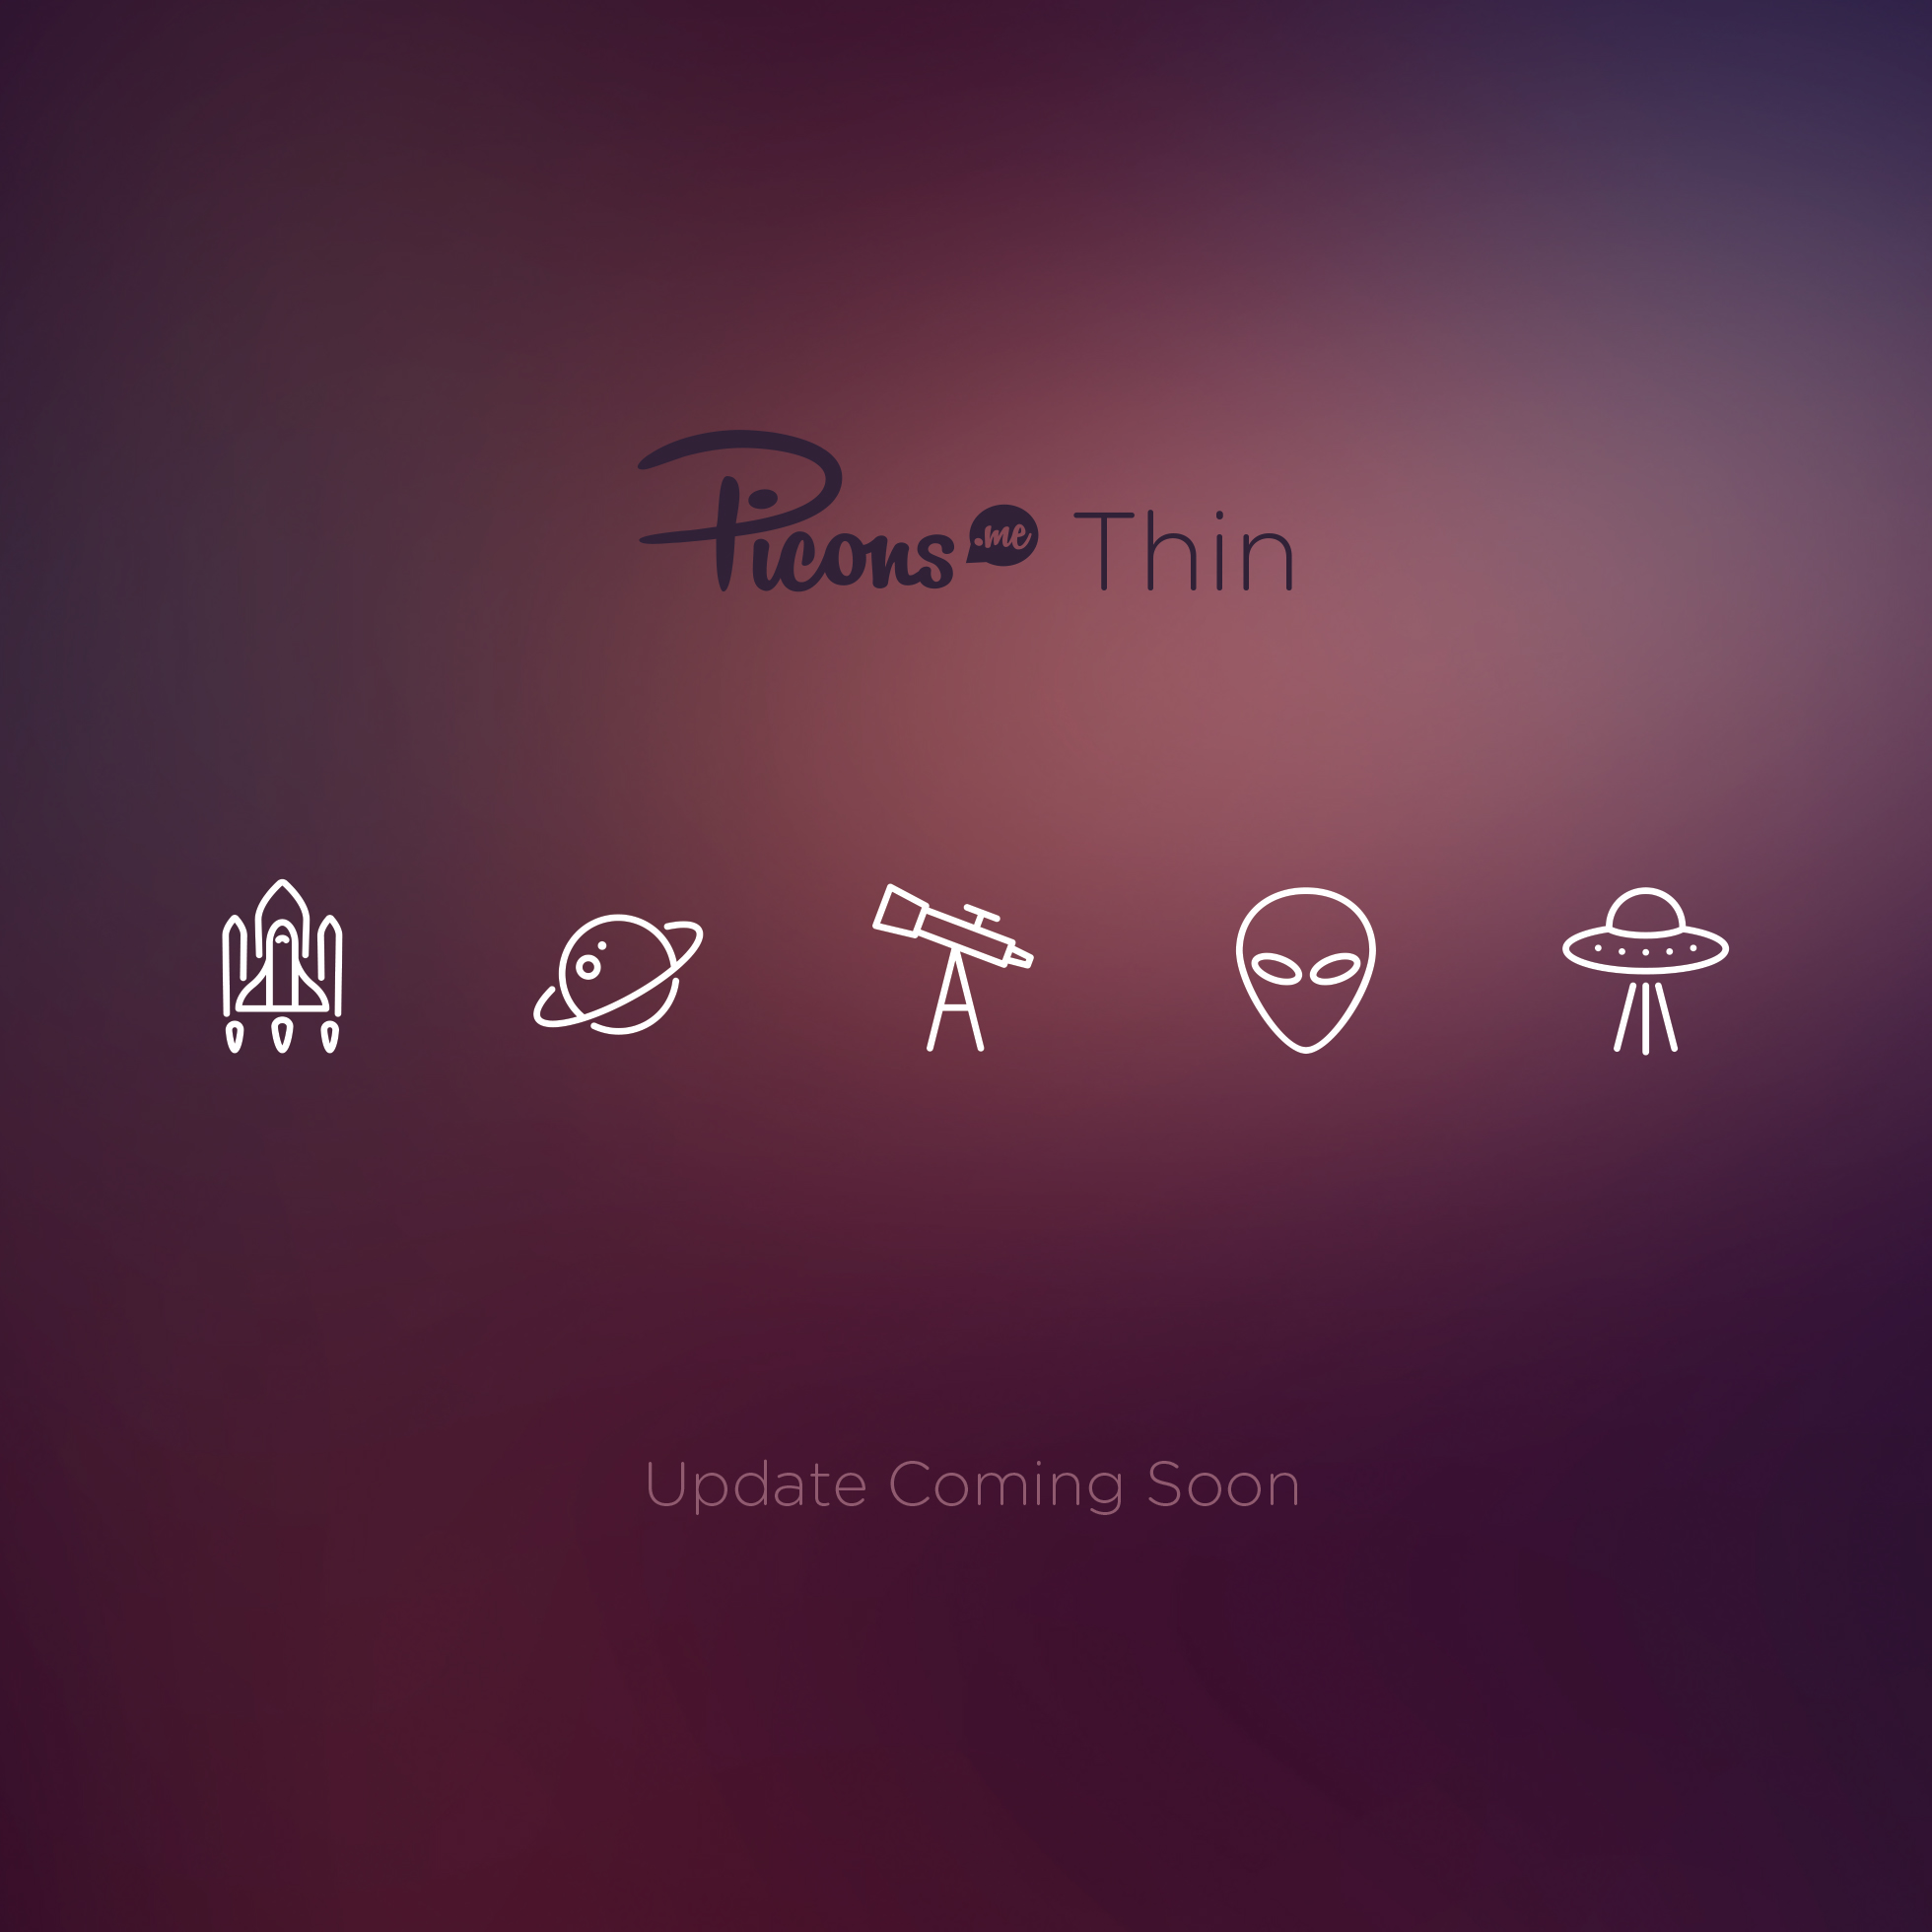 Picons Thin - update soon